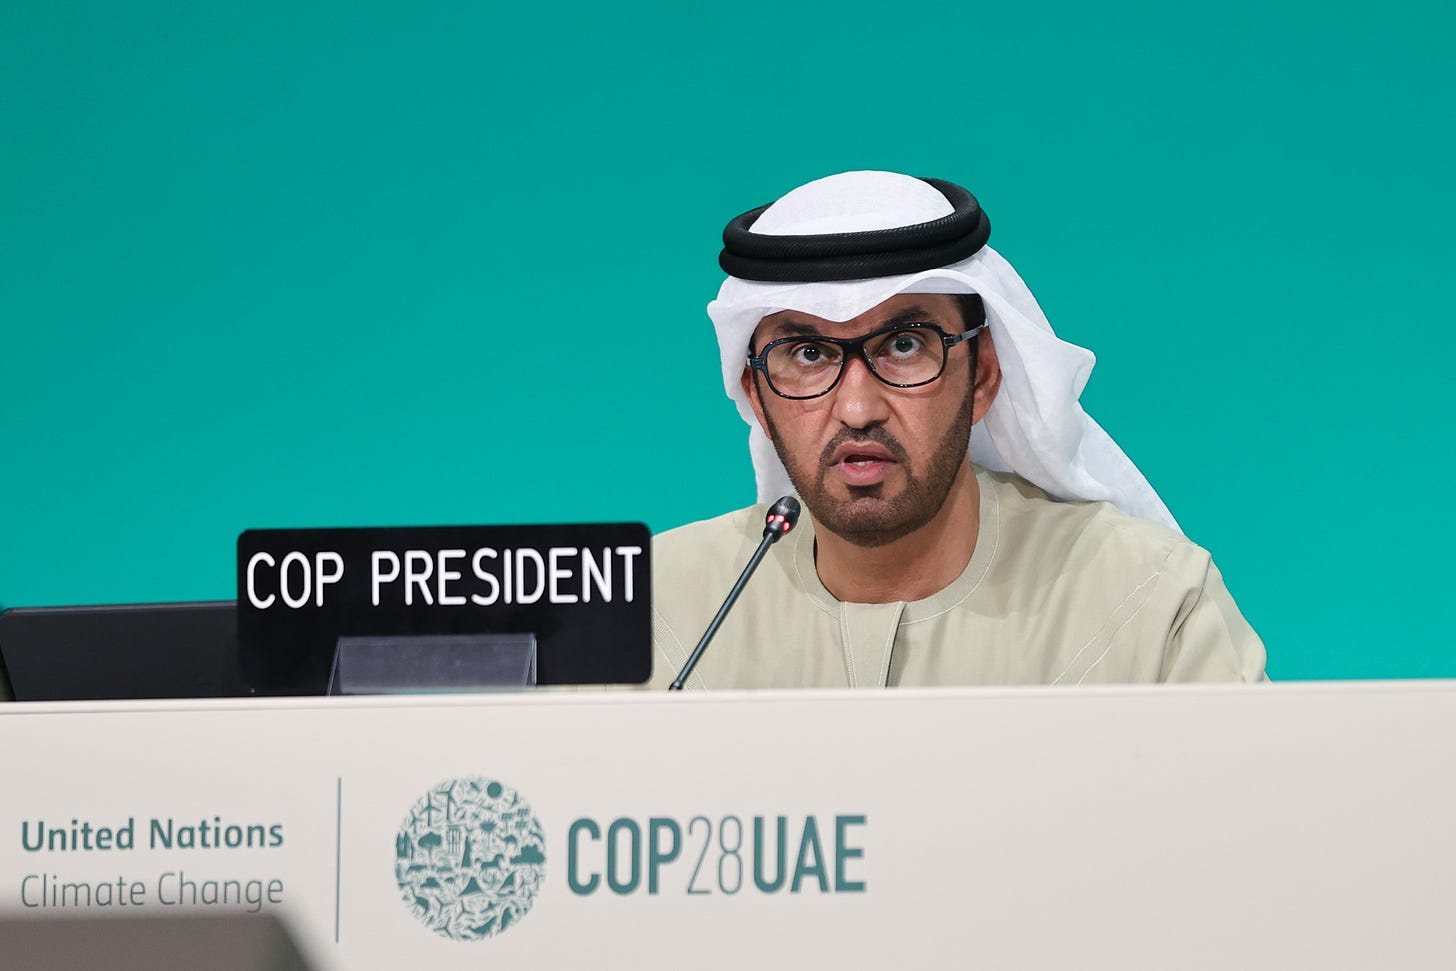 In a photo, a Saudi man wearing glasses and stubble sits at a desk in front of which is a sign that reads "COP president".